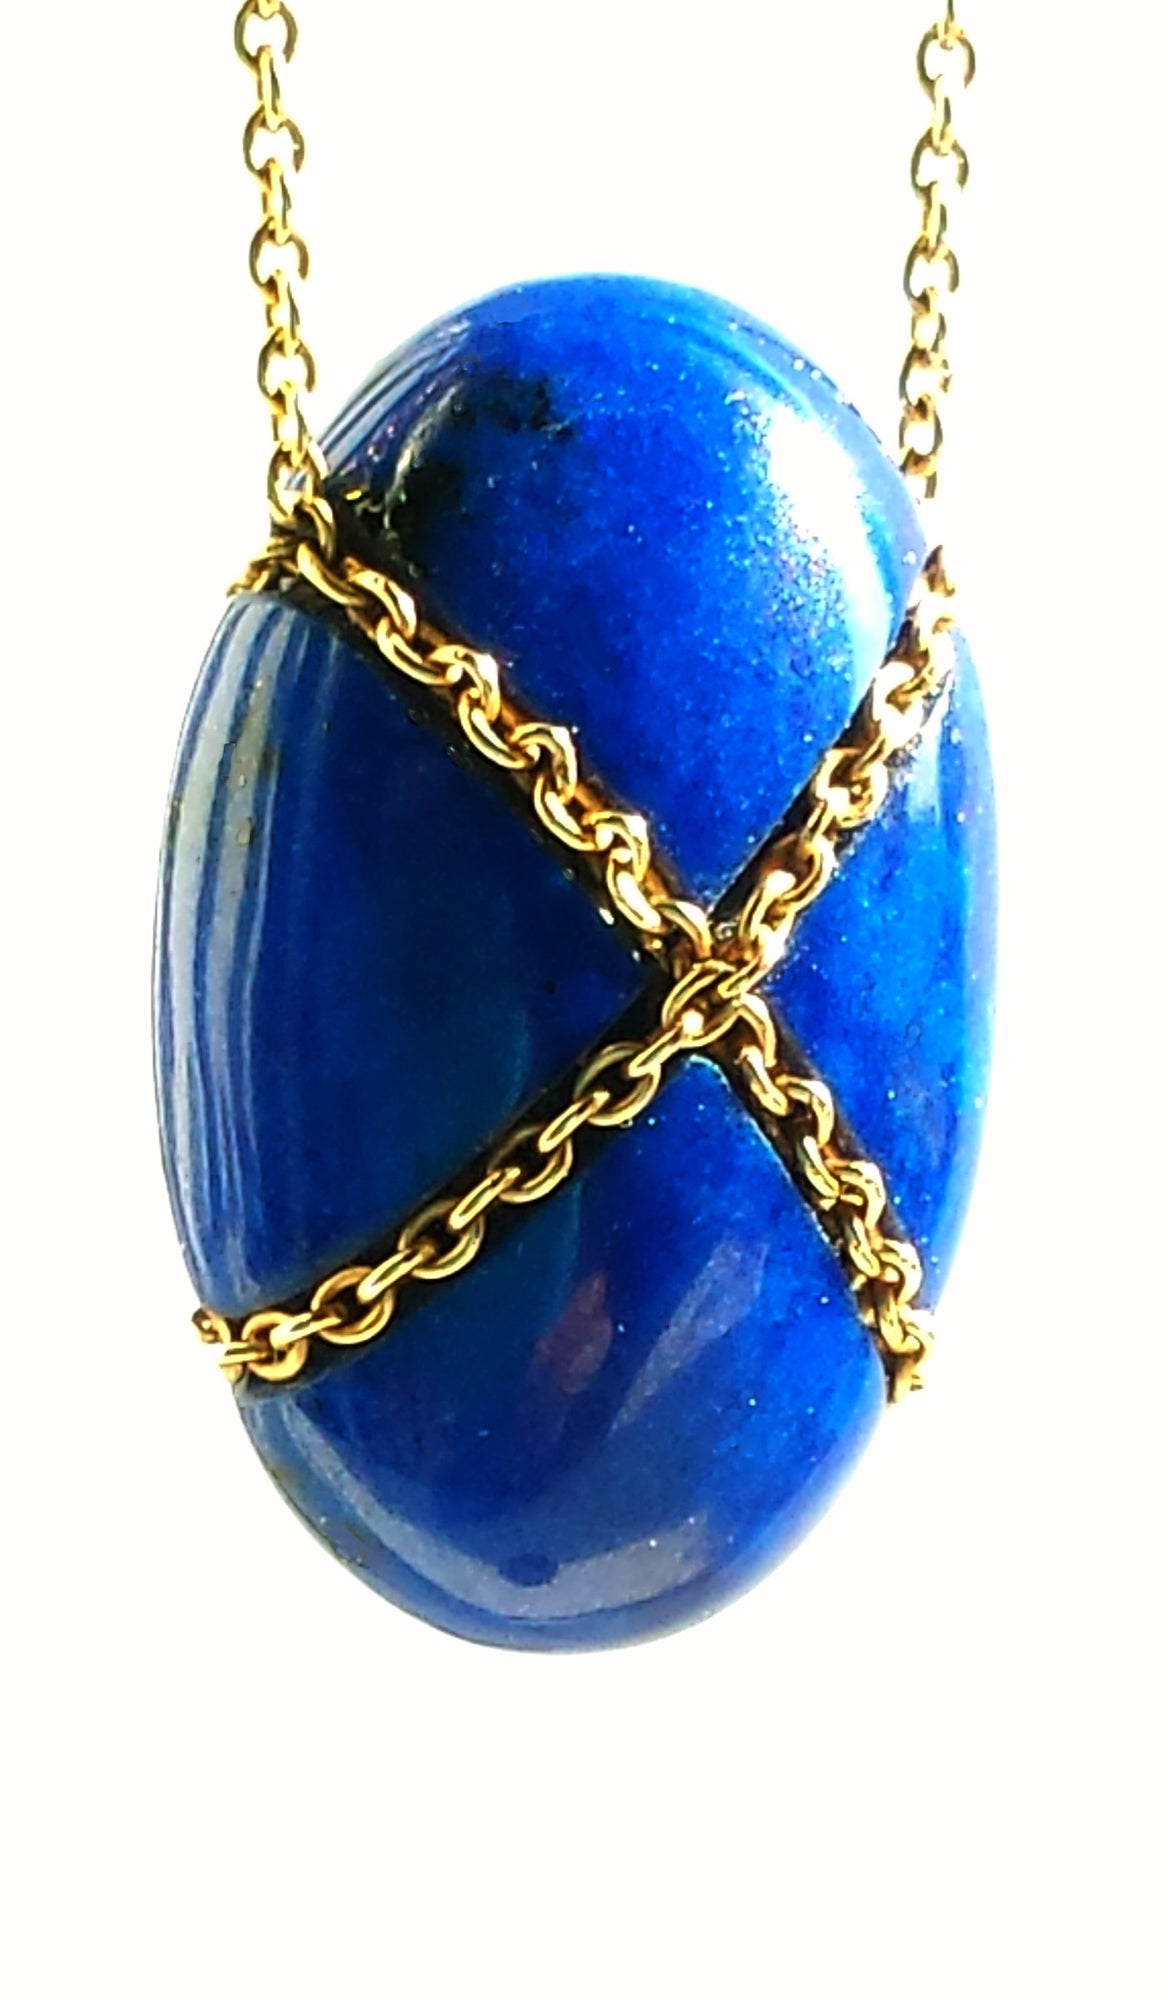 Vintage Tiffany & Co. Lapis Lazuli Bean Pendant / Necklace with 18in G ...